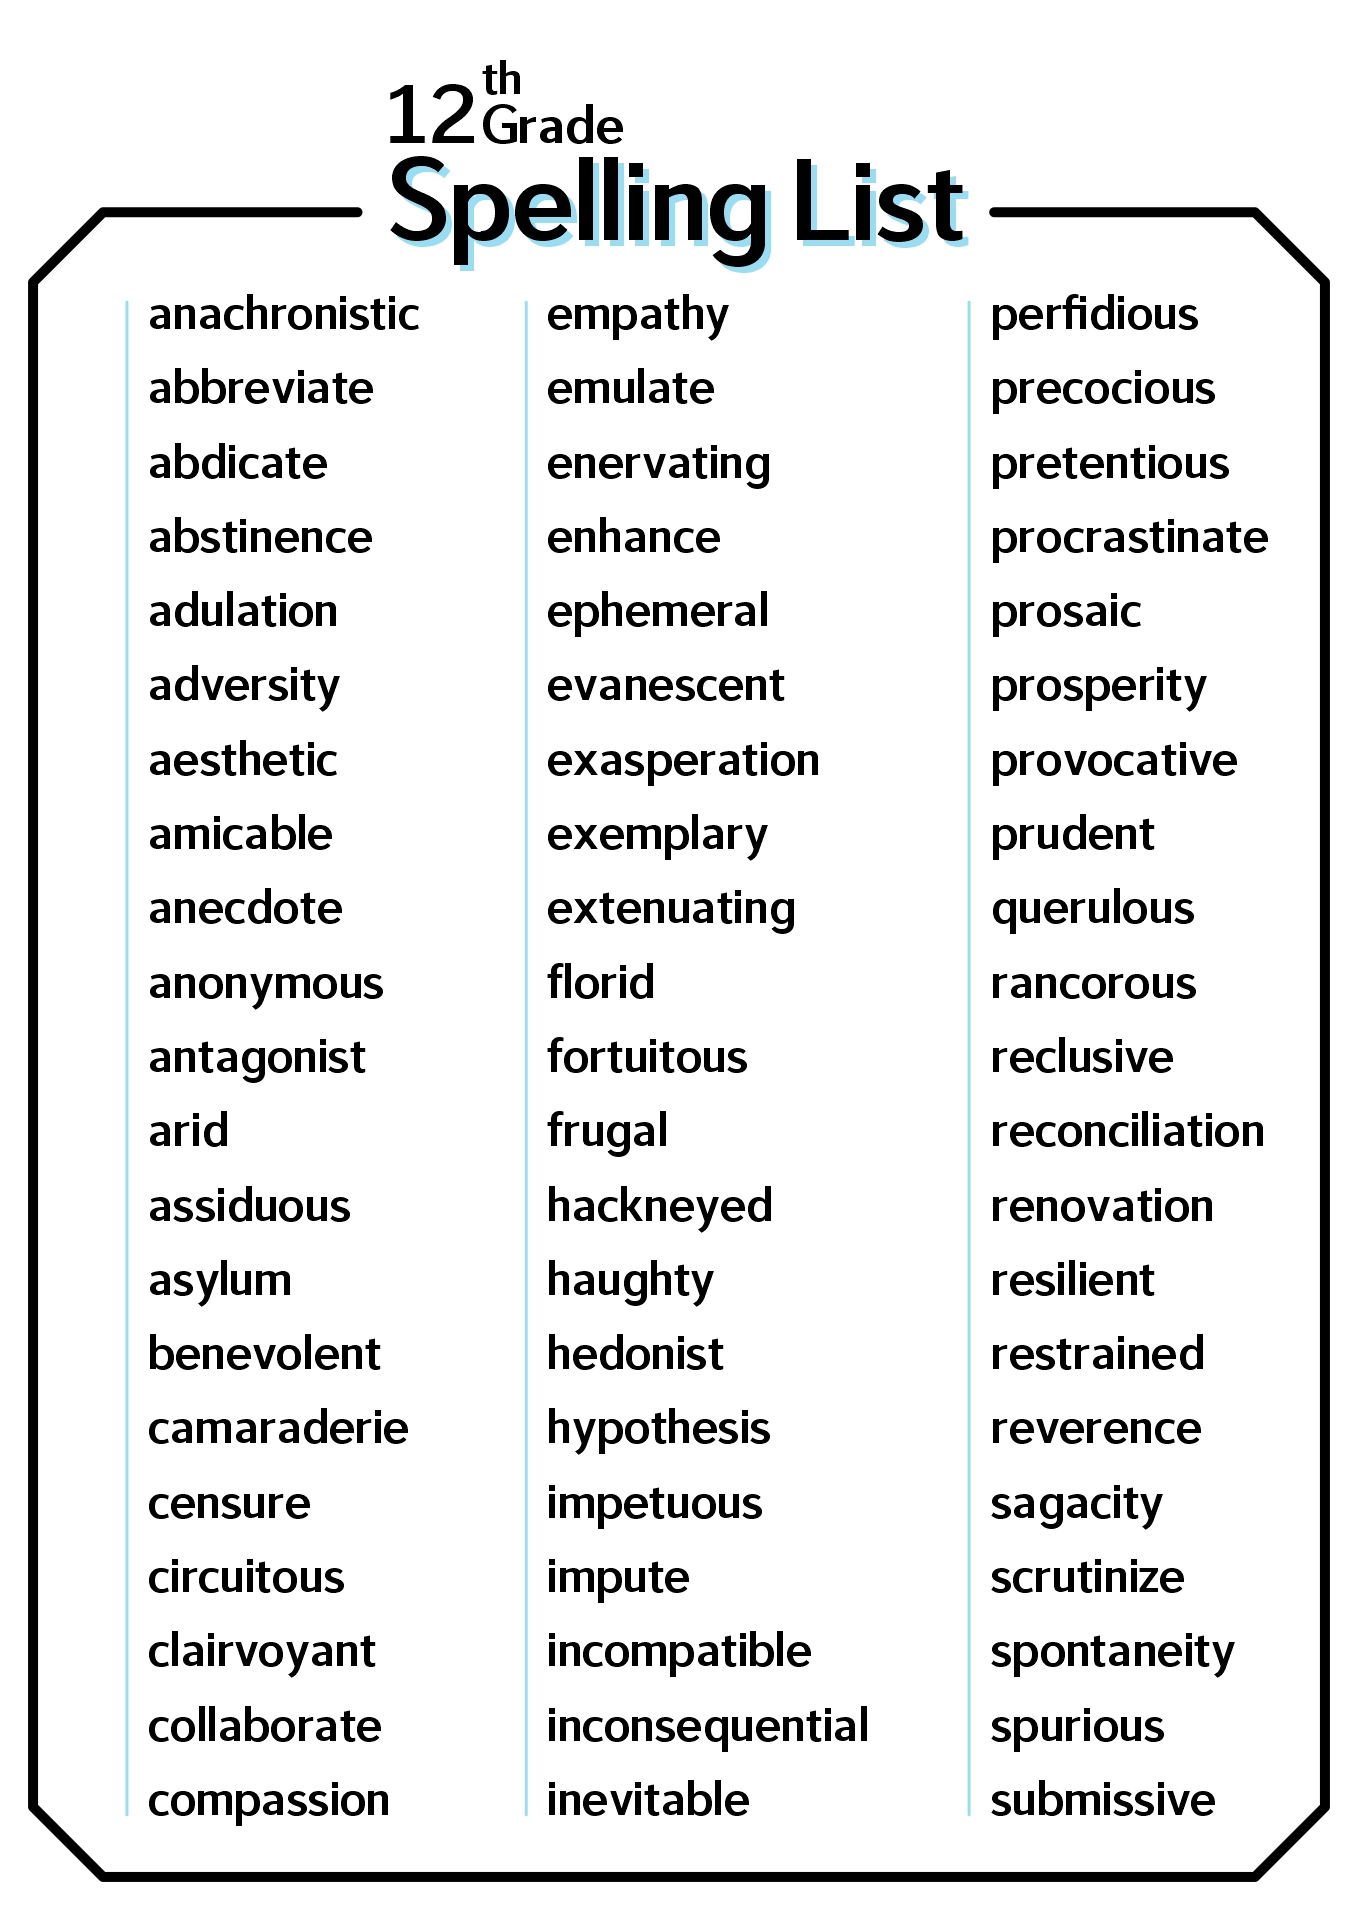 17-best-images-of-9th-grade-worksheets-spelling-words-9th-grade